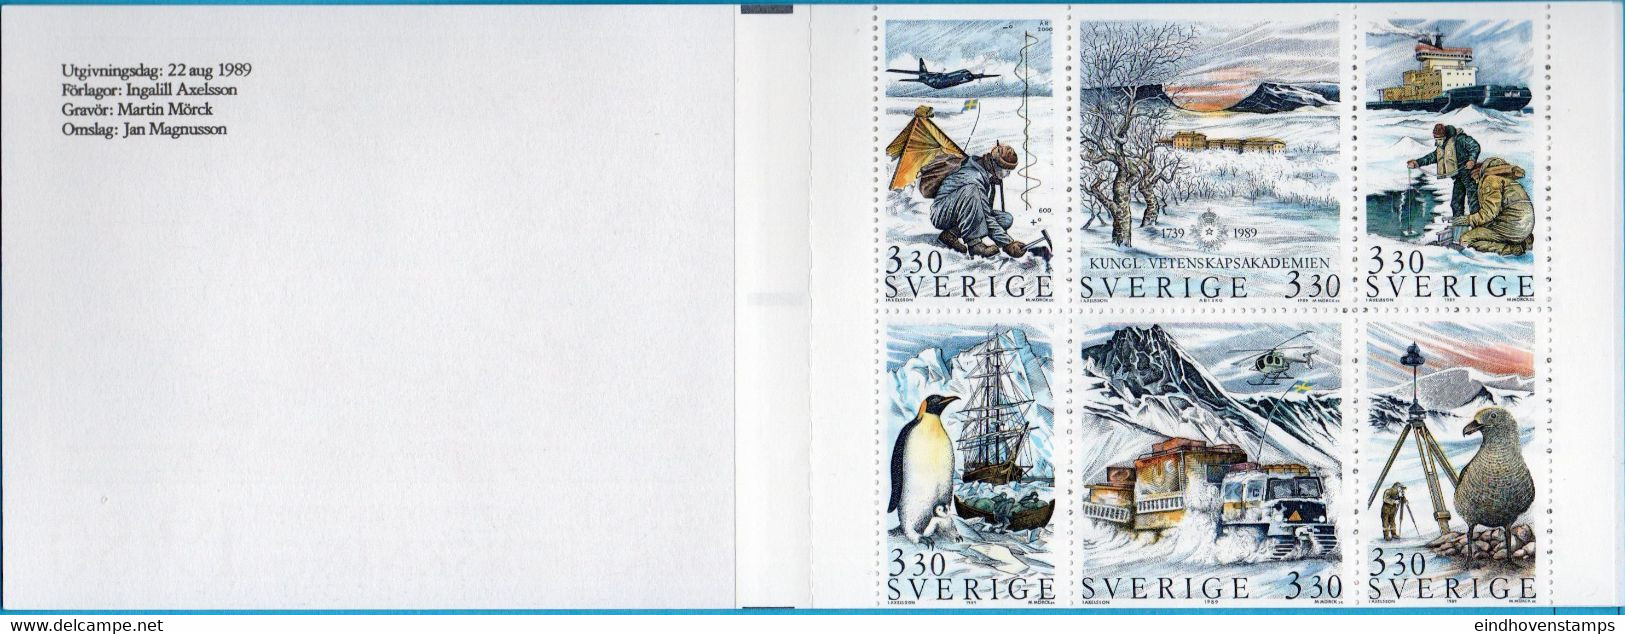 Sweden Sverige 1989 Stamp Booklet Polar Research Cancelled Academy Of Science MNH 89M141 - Programmi Di Ricerca